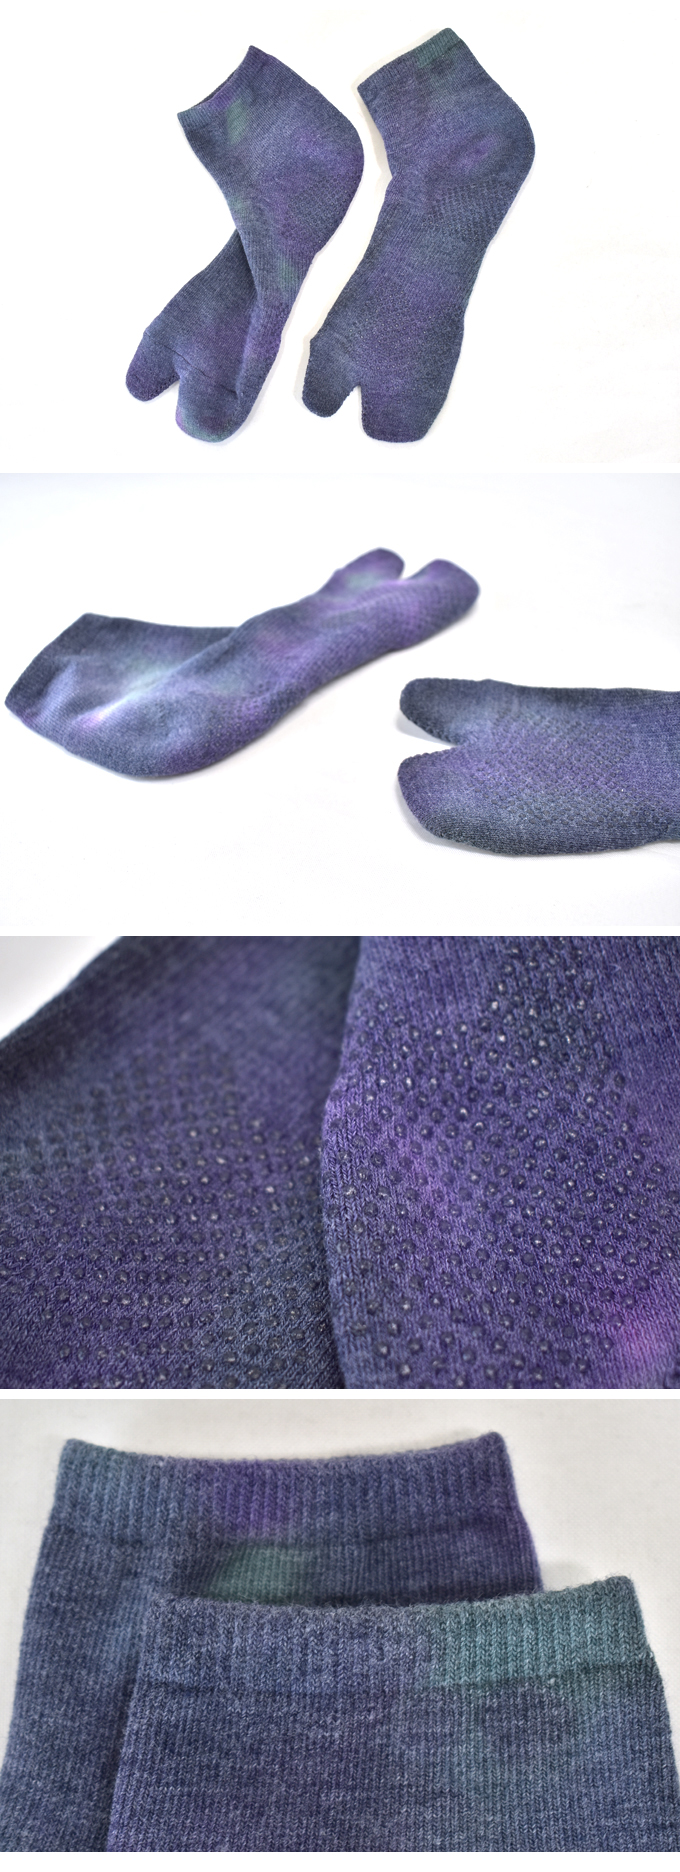 Thumb Ankle Socks - Cool Max / Uneven Dye / Charcoal